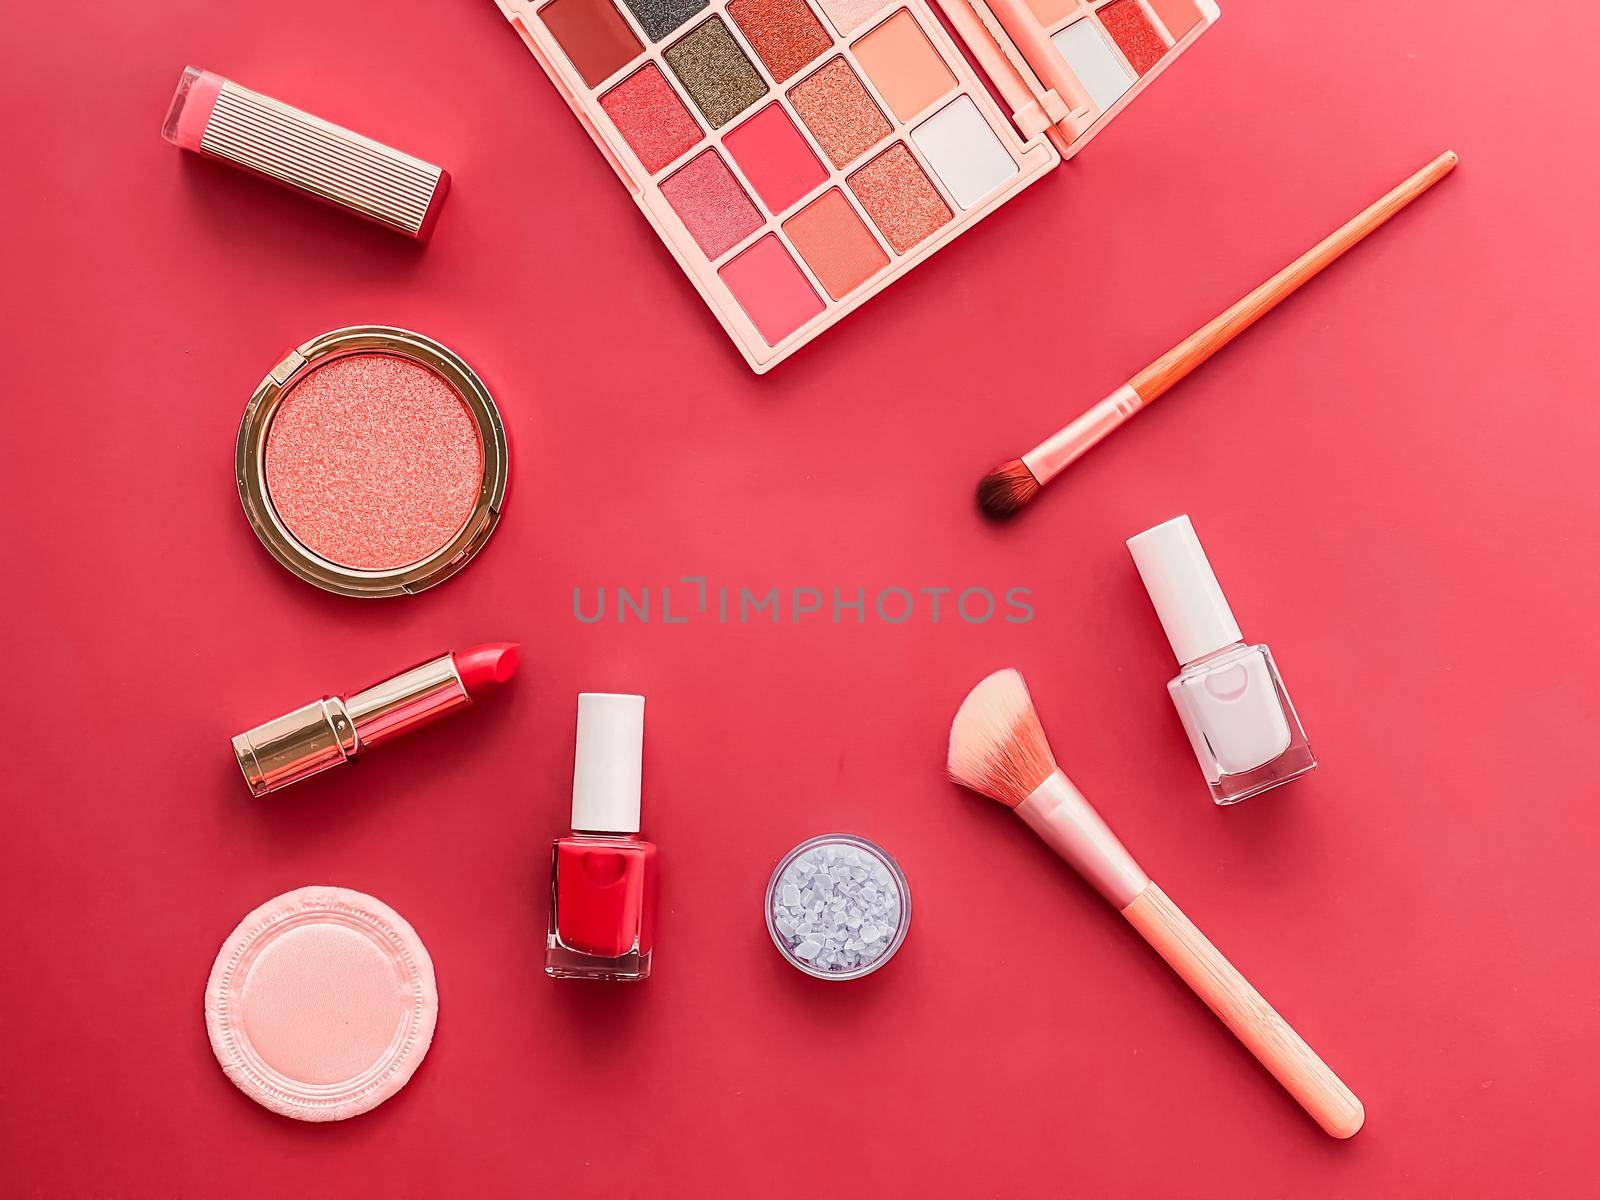 Beauty, make-up and cosmetics flatlay design with copyspace, cosmetic products and makeup tools on coral background, girly and feminine style by Anneleven